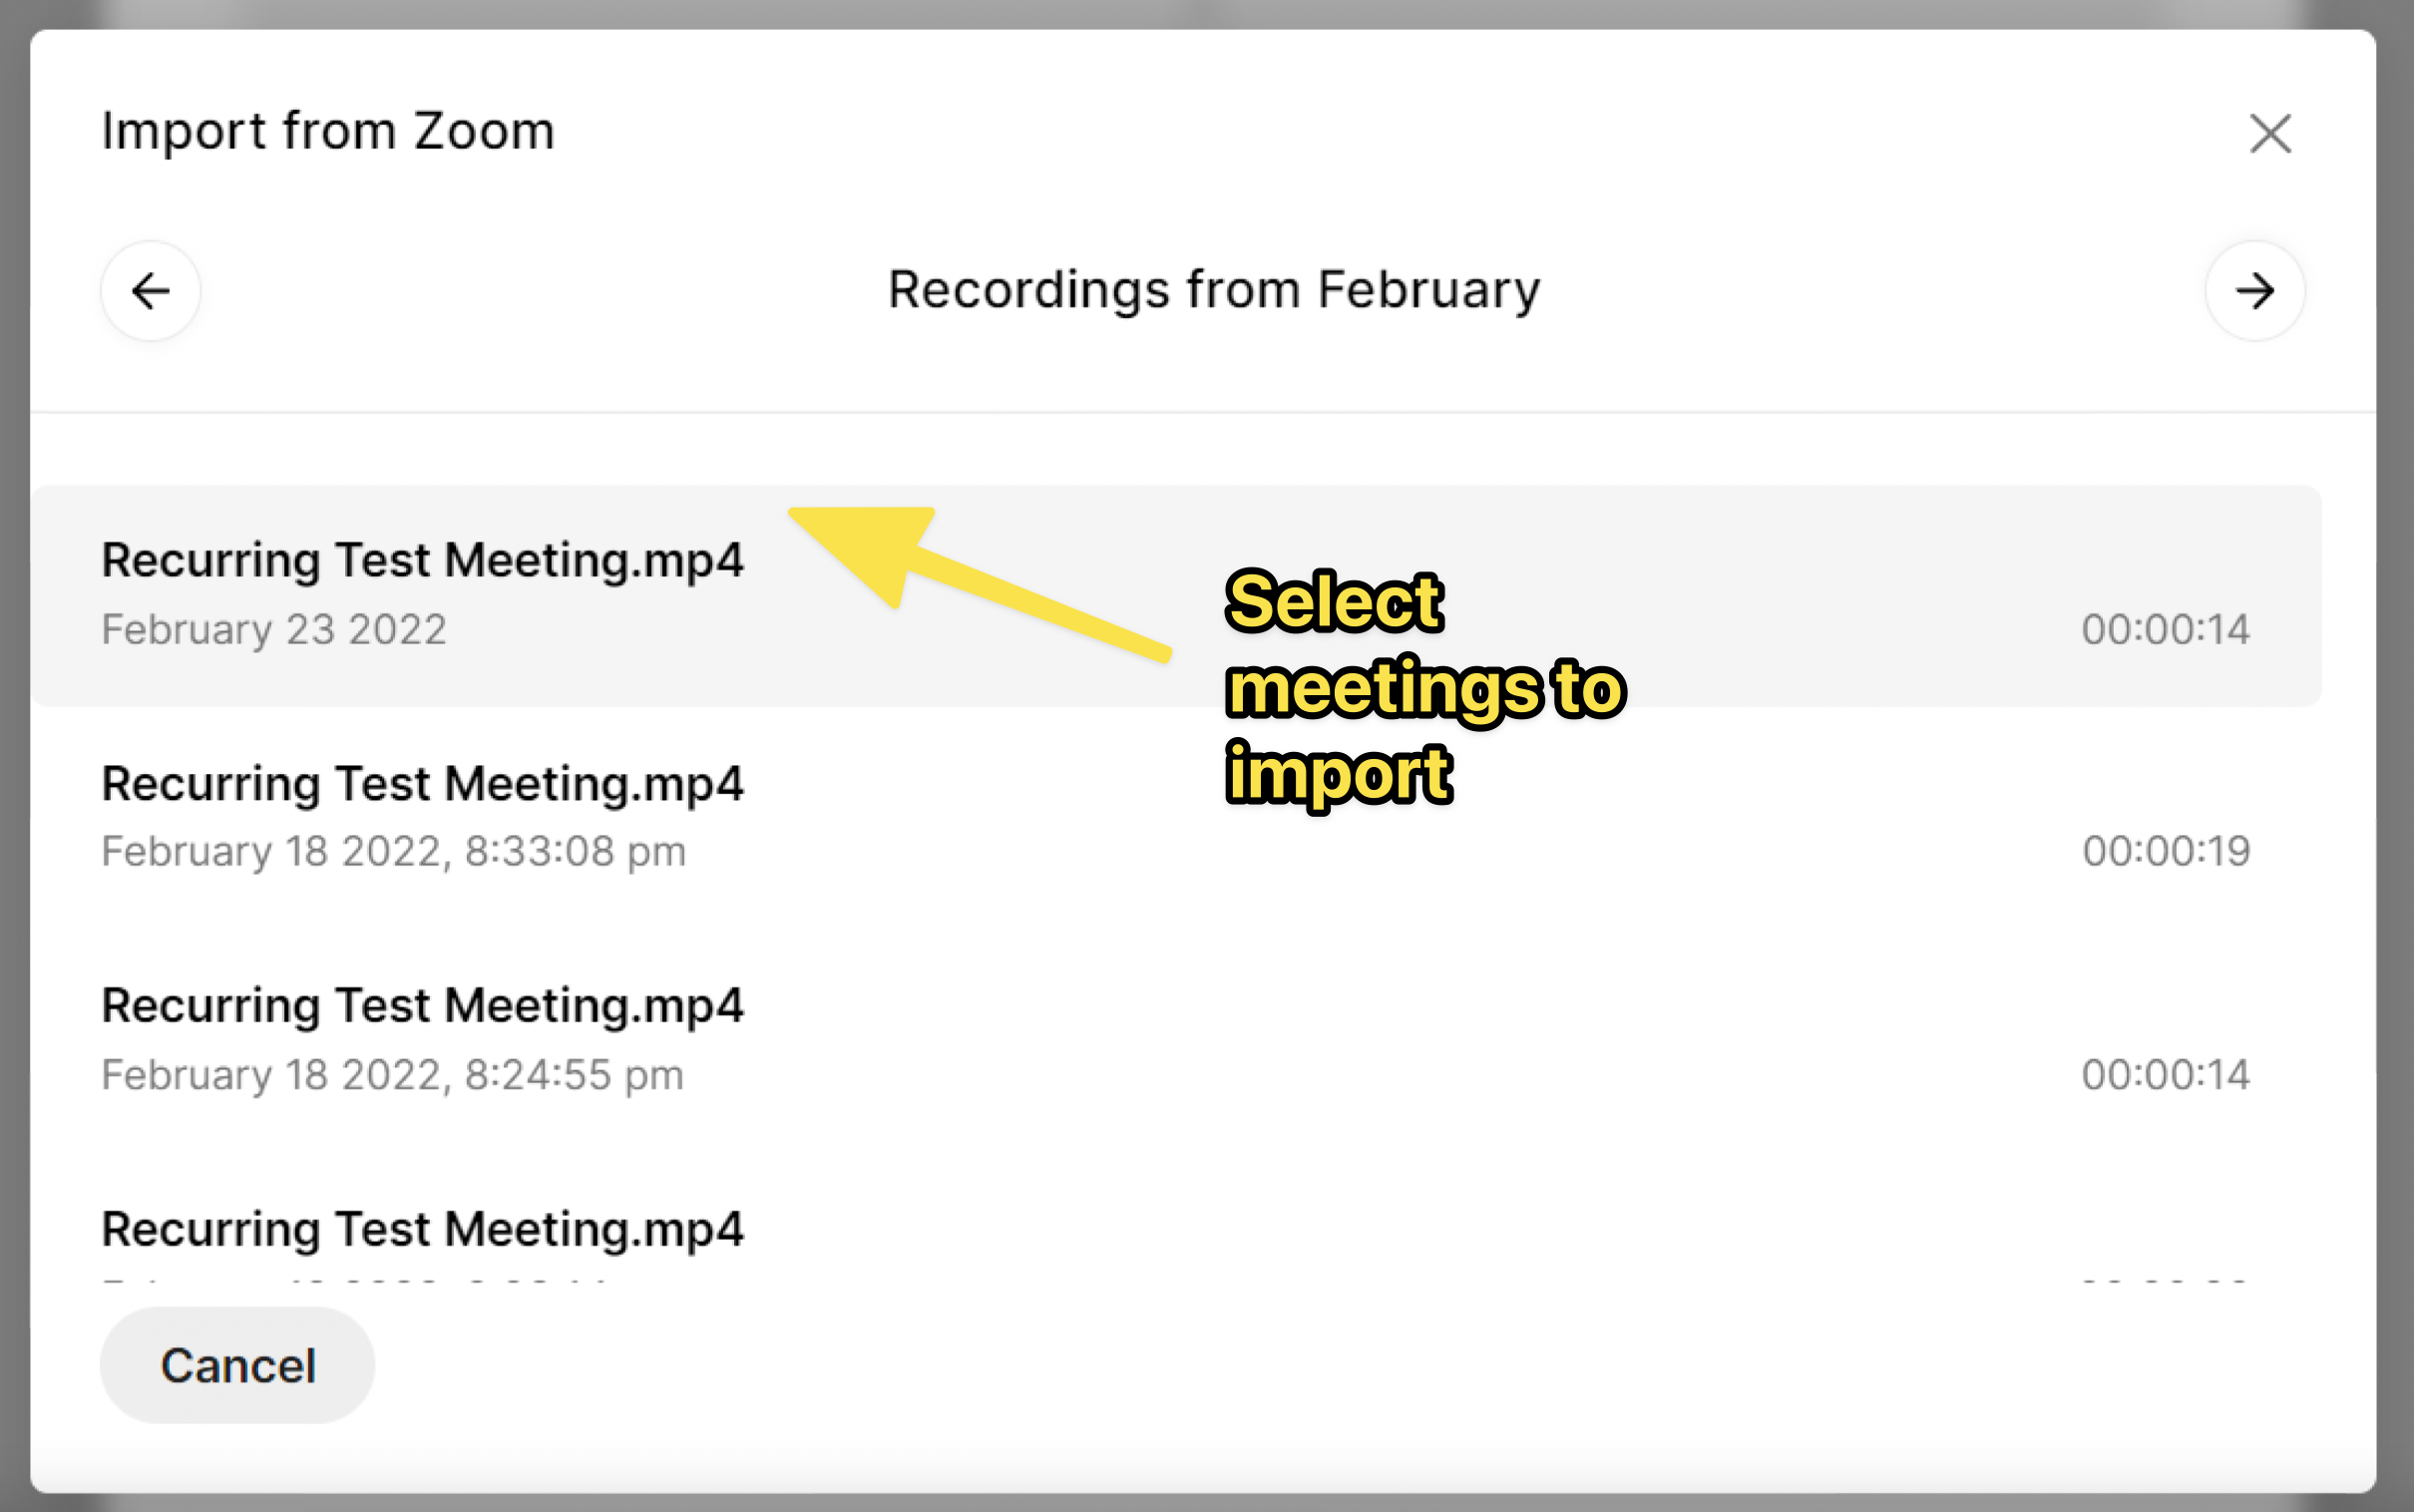 Select video recordings zoom meetings to import